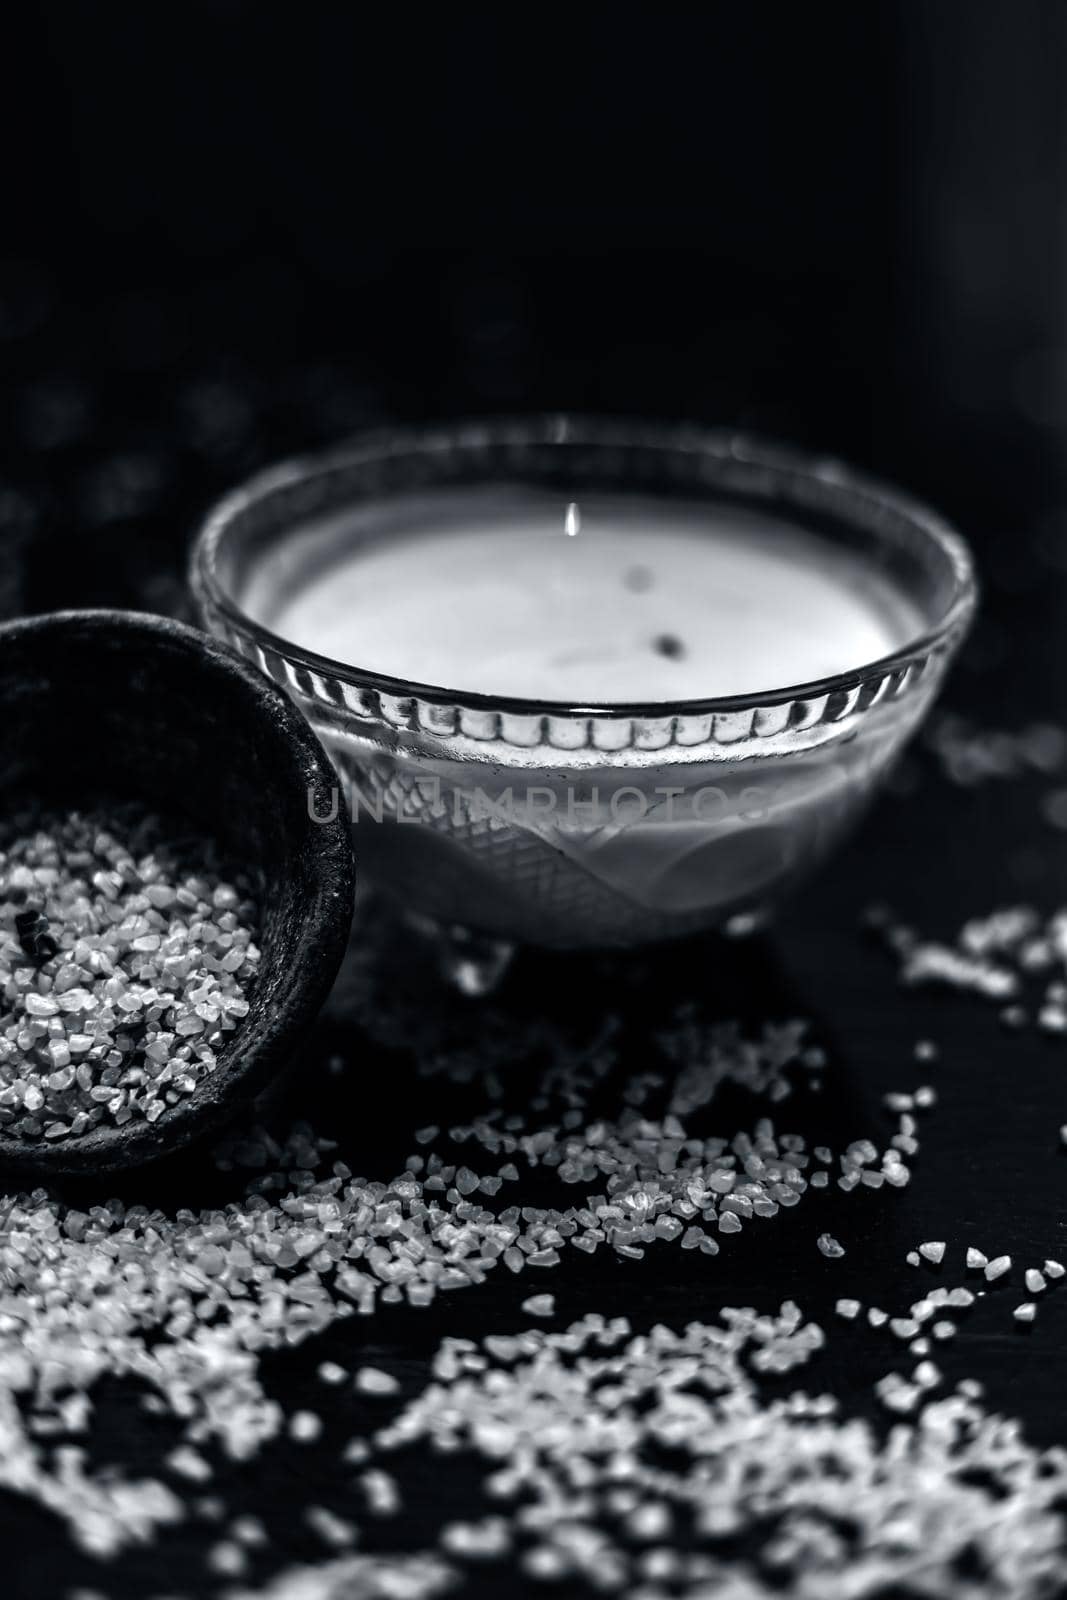 Curd or yogurt and oats face mask on the woodne surface in a glass bowl along with some raw oats in a black colored clay bowl and some spread on the surface. To Exfoliate Your Skin. by mirzamlk